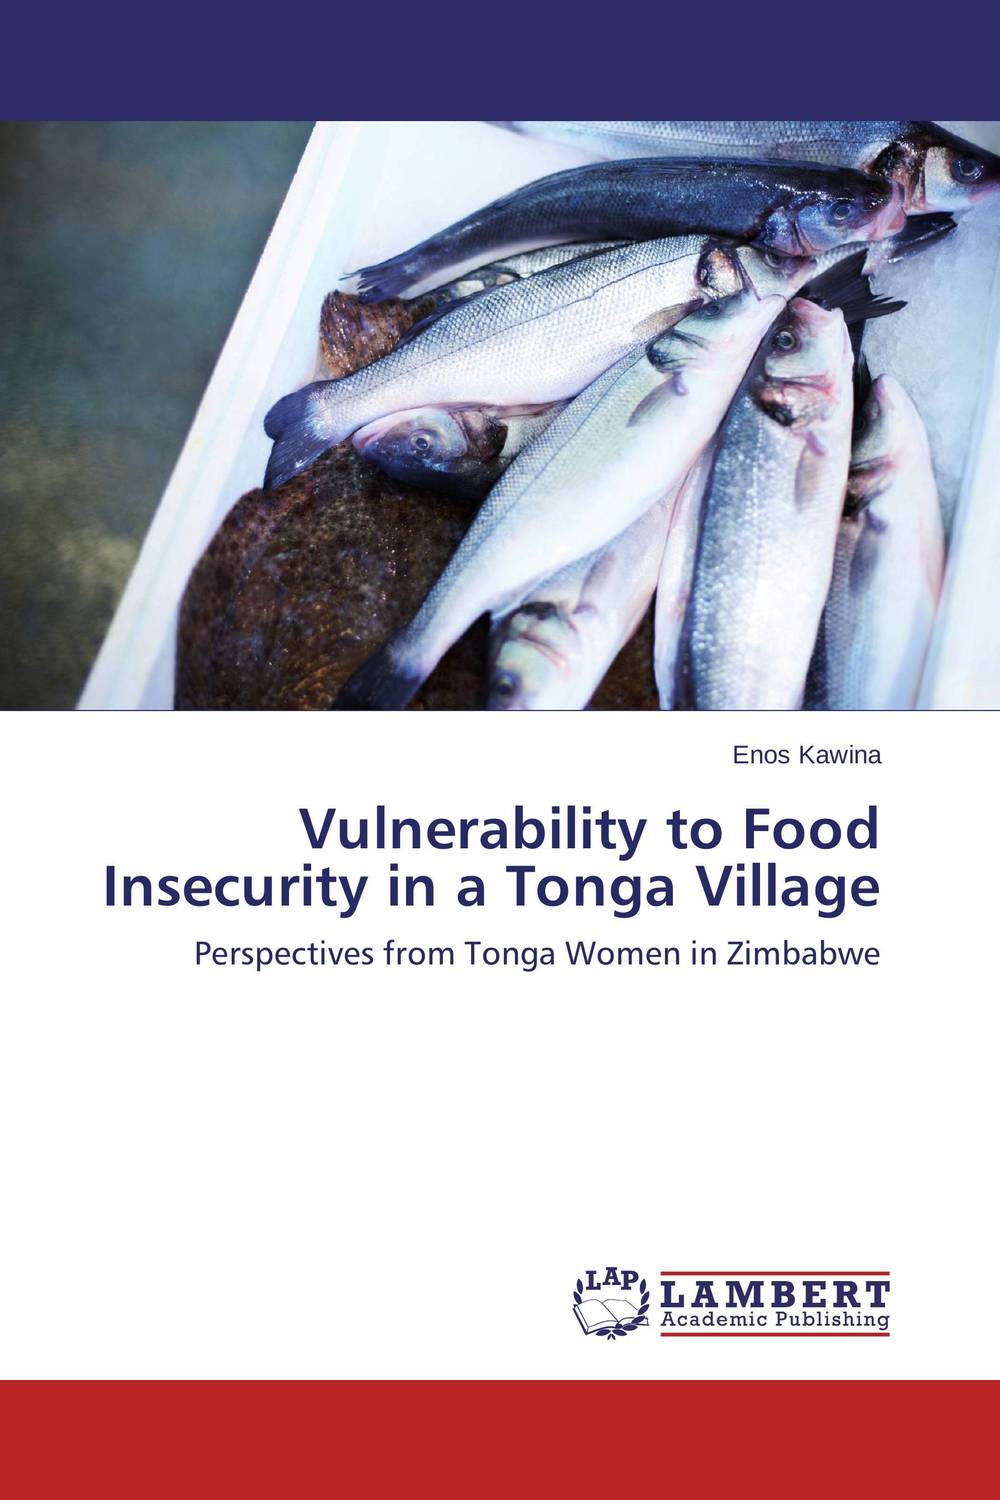 Vulnerability to Food Insecurity in a Tonga Village